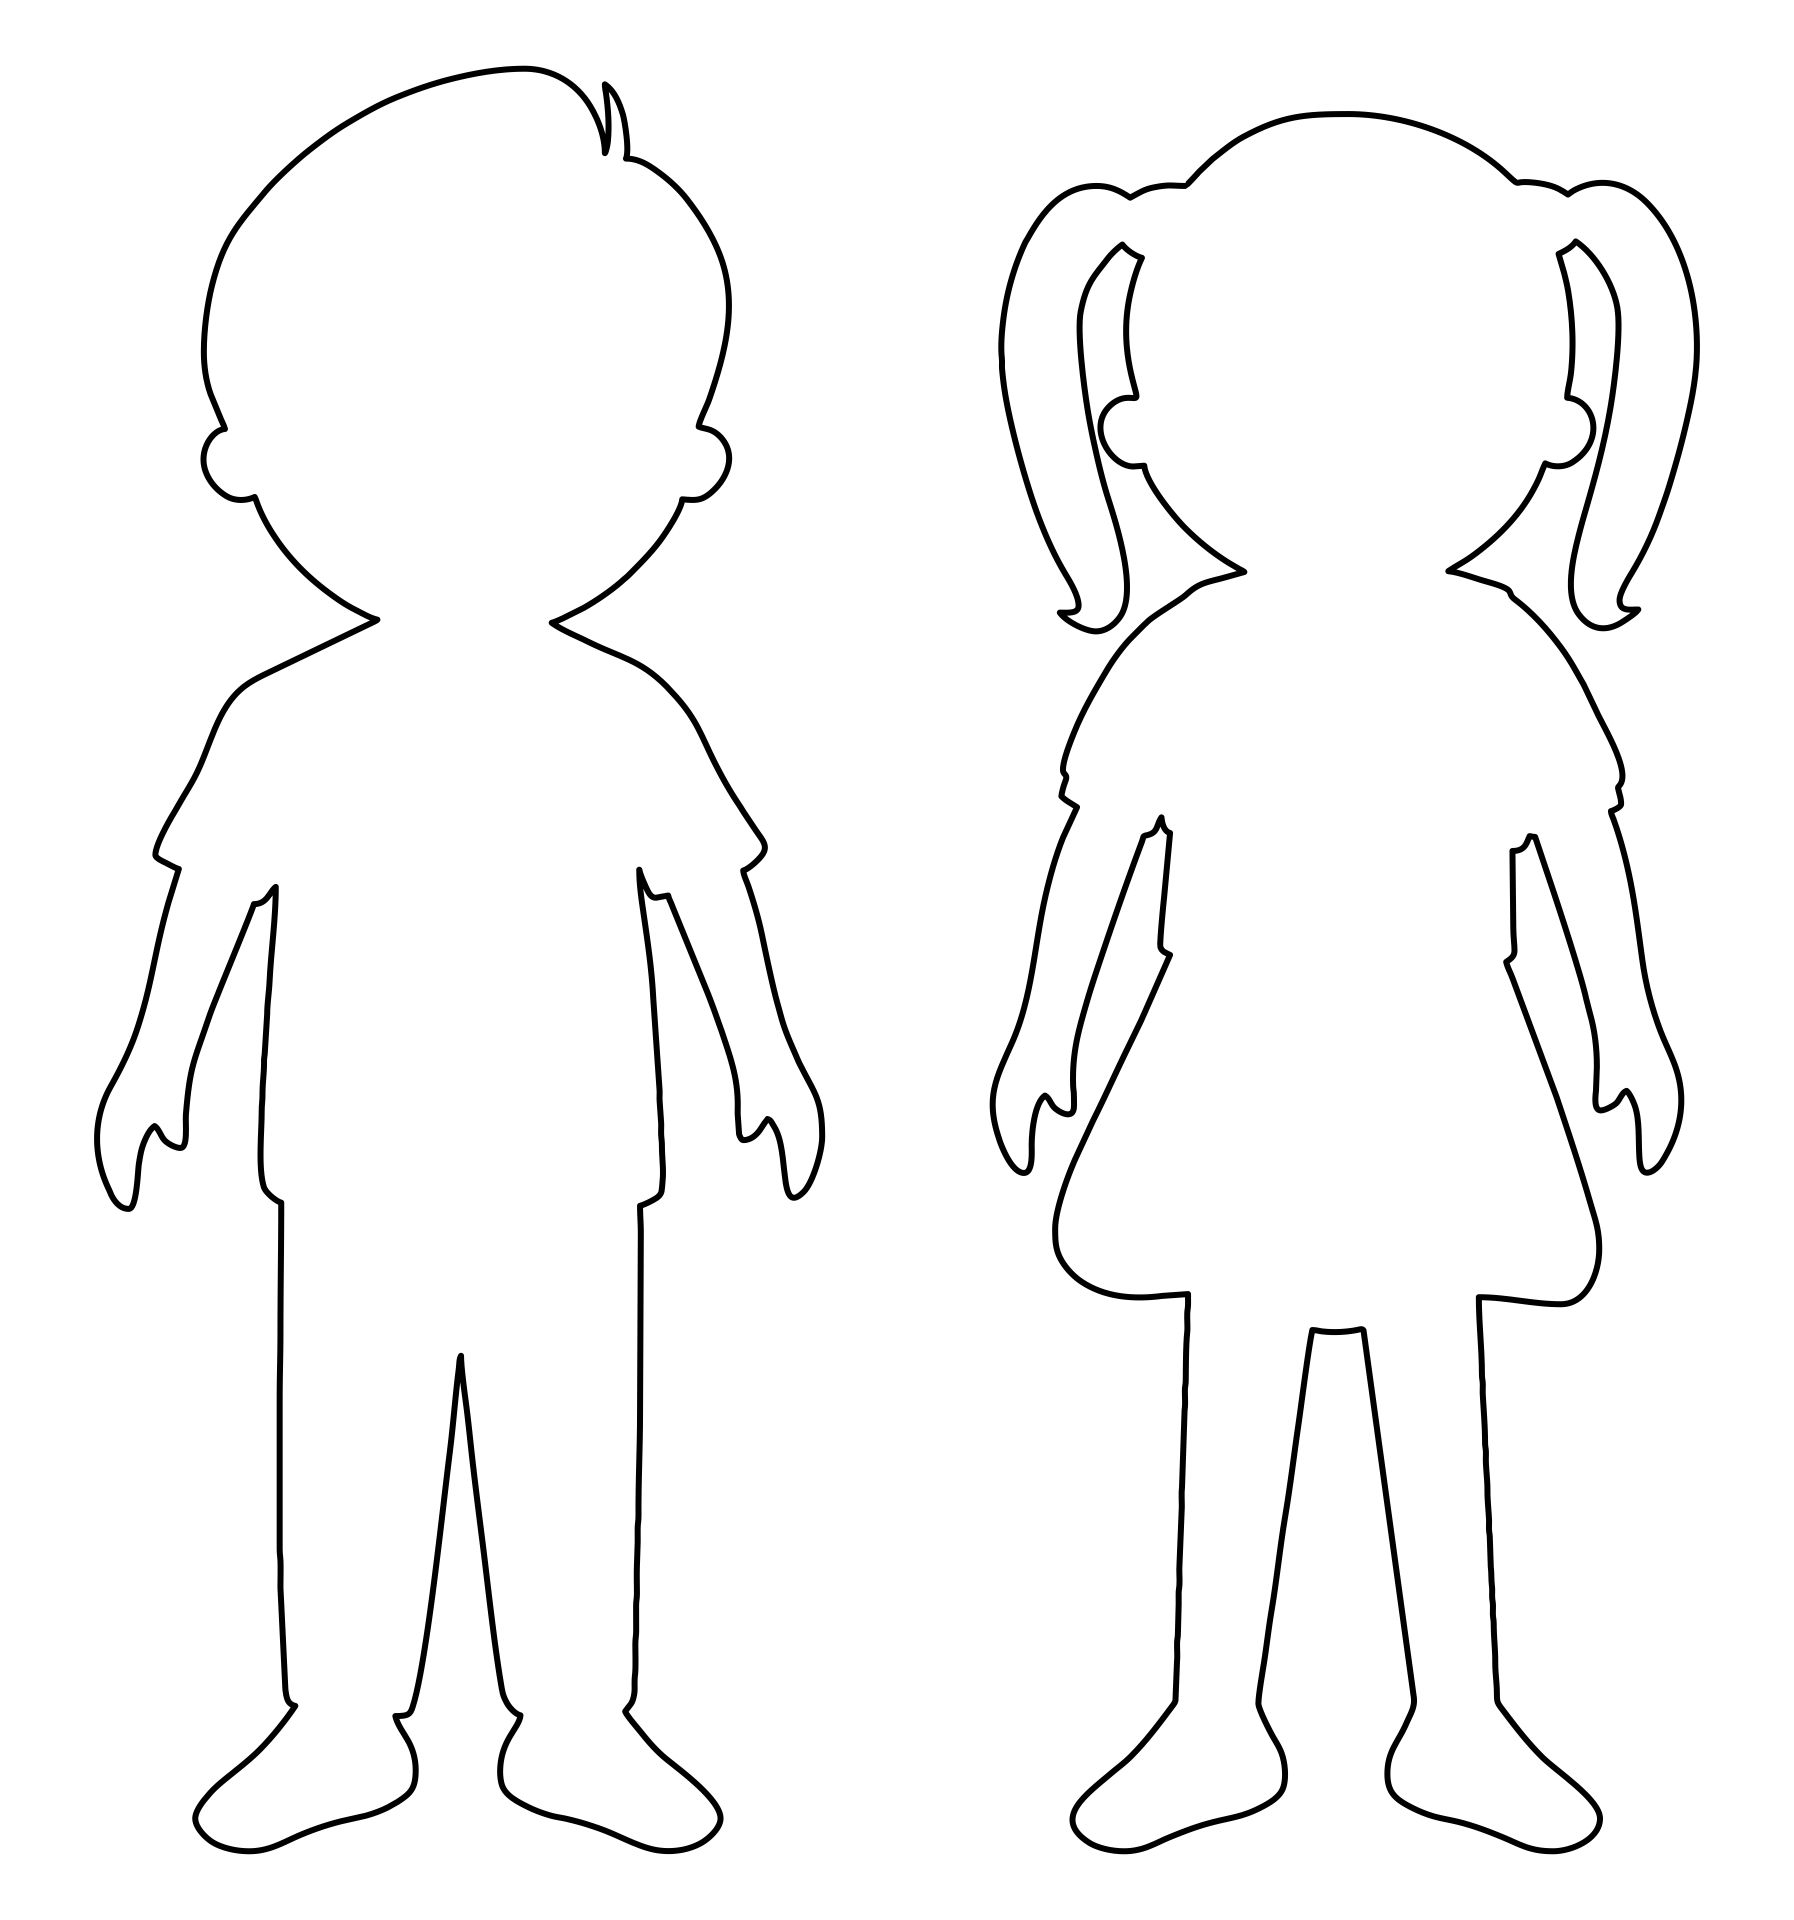 Printable Person Cut Out